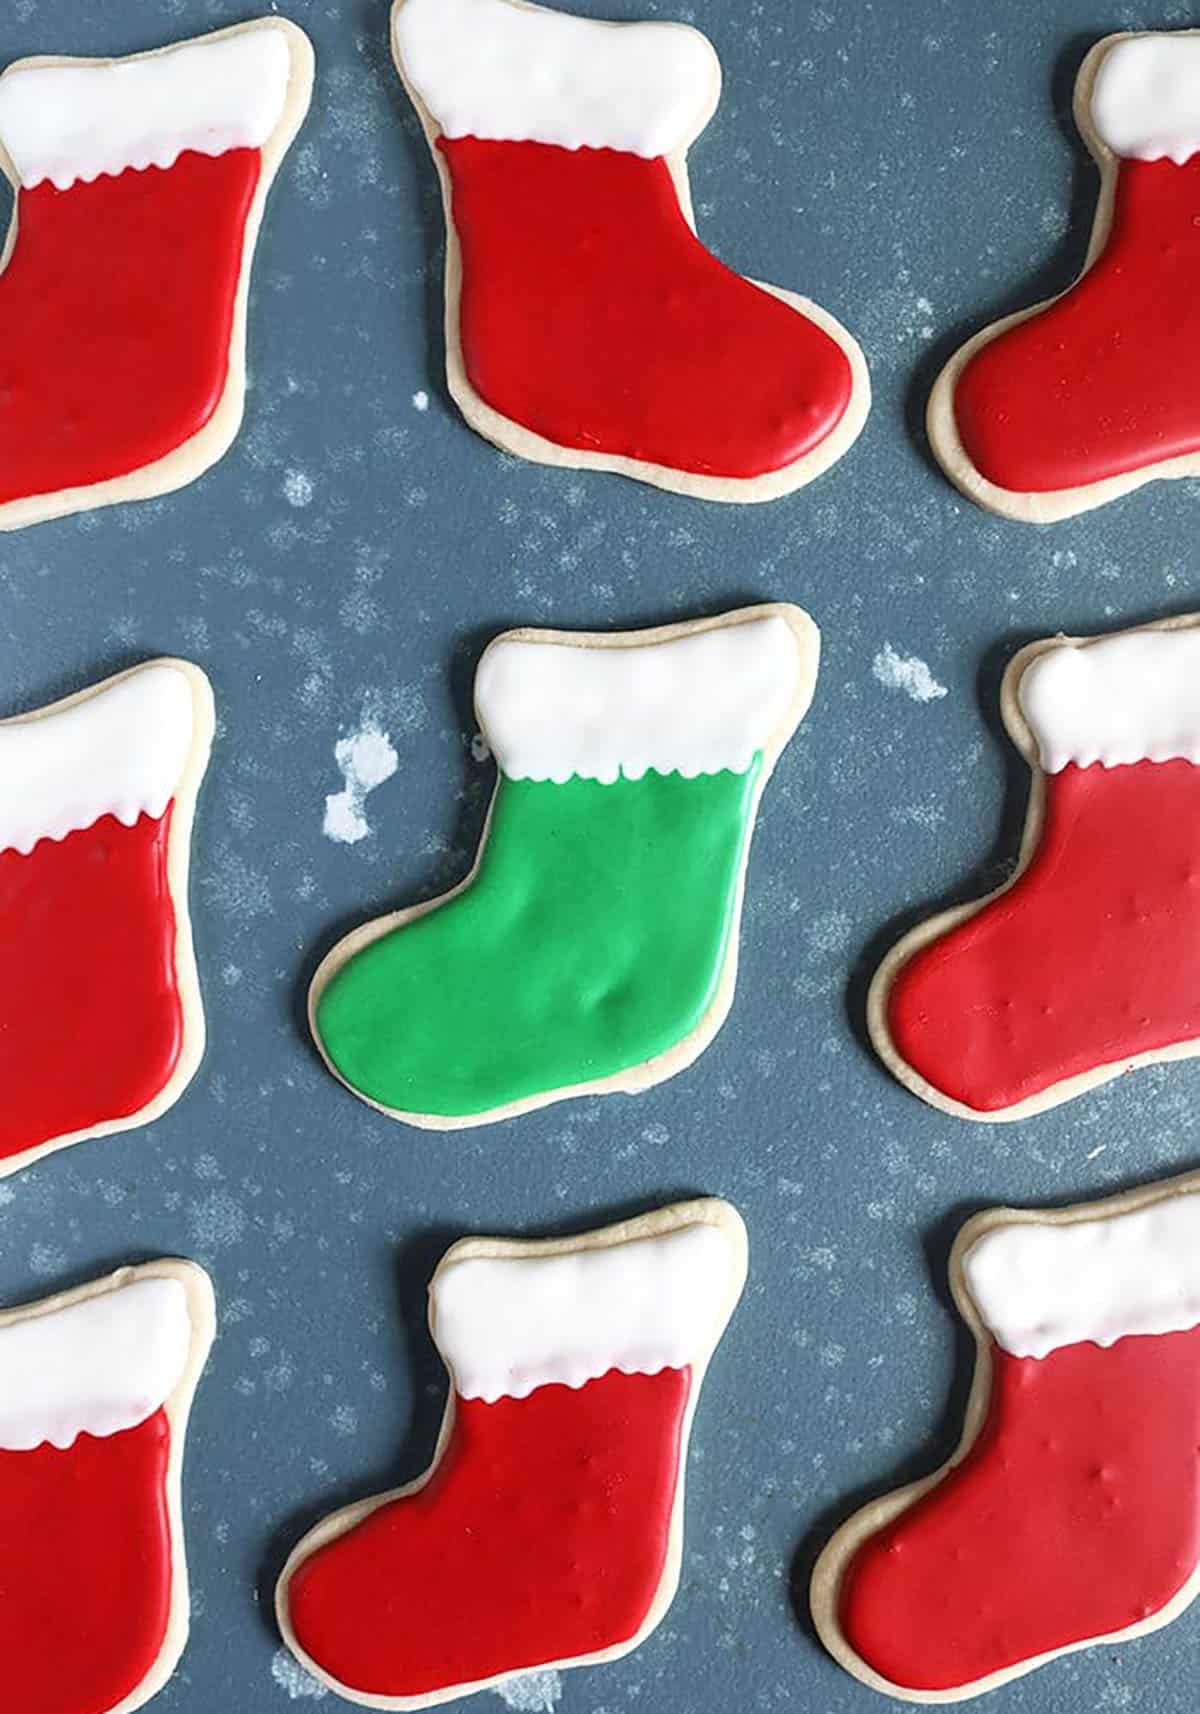 Red stocking cookies arranged in a line on a blue background.